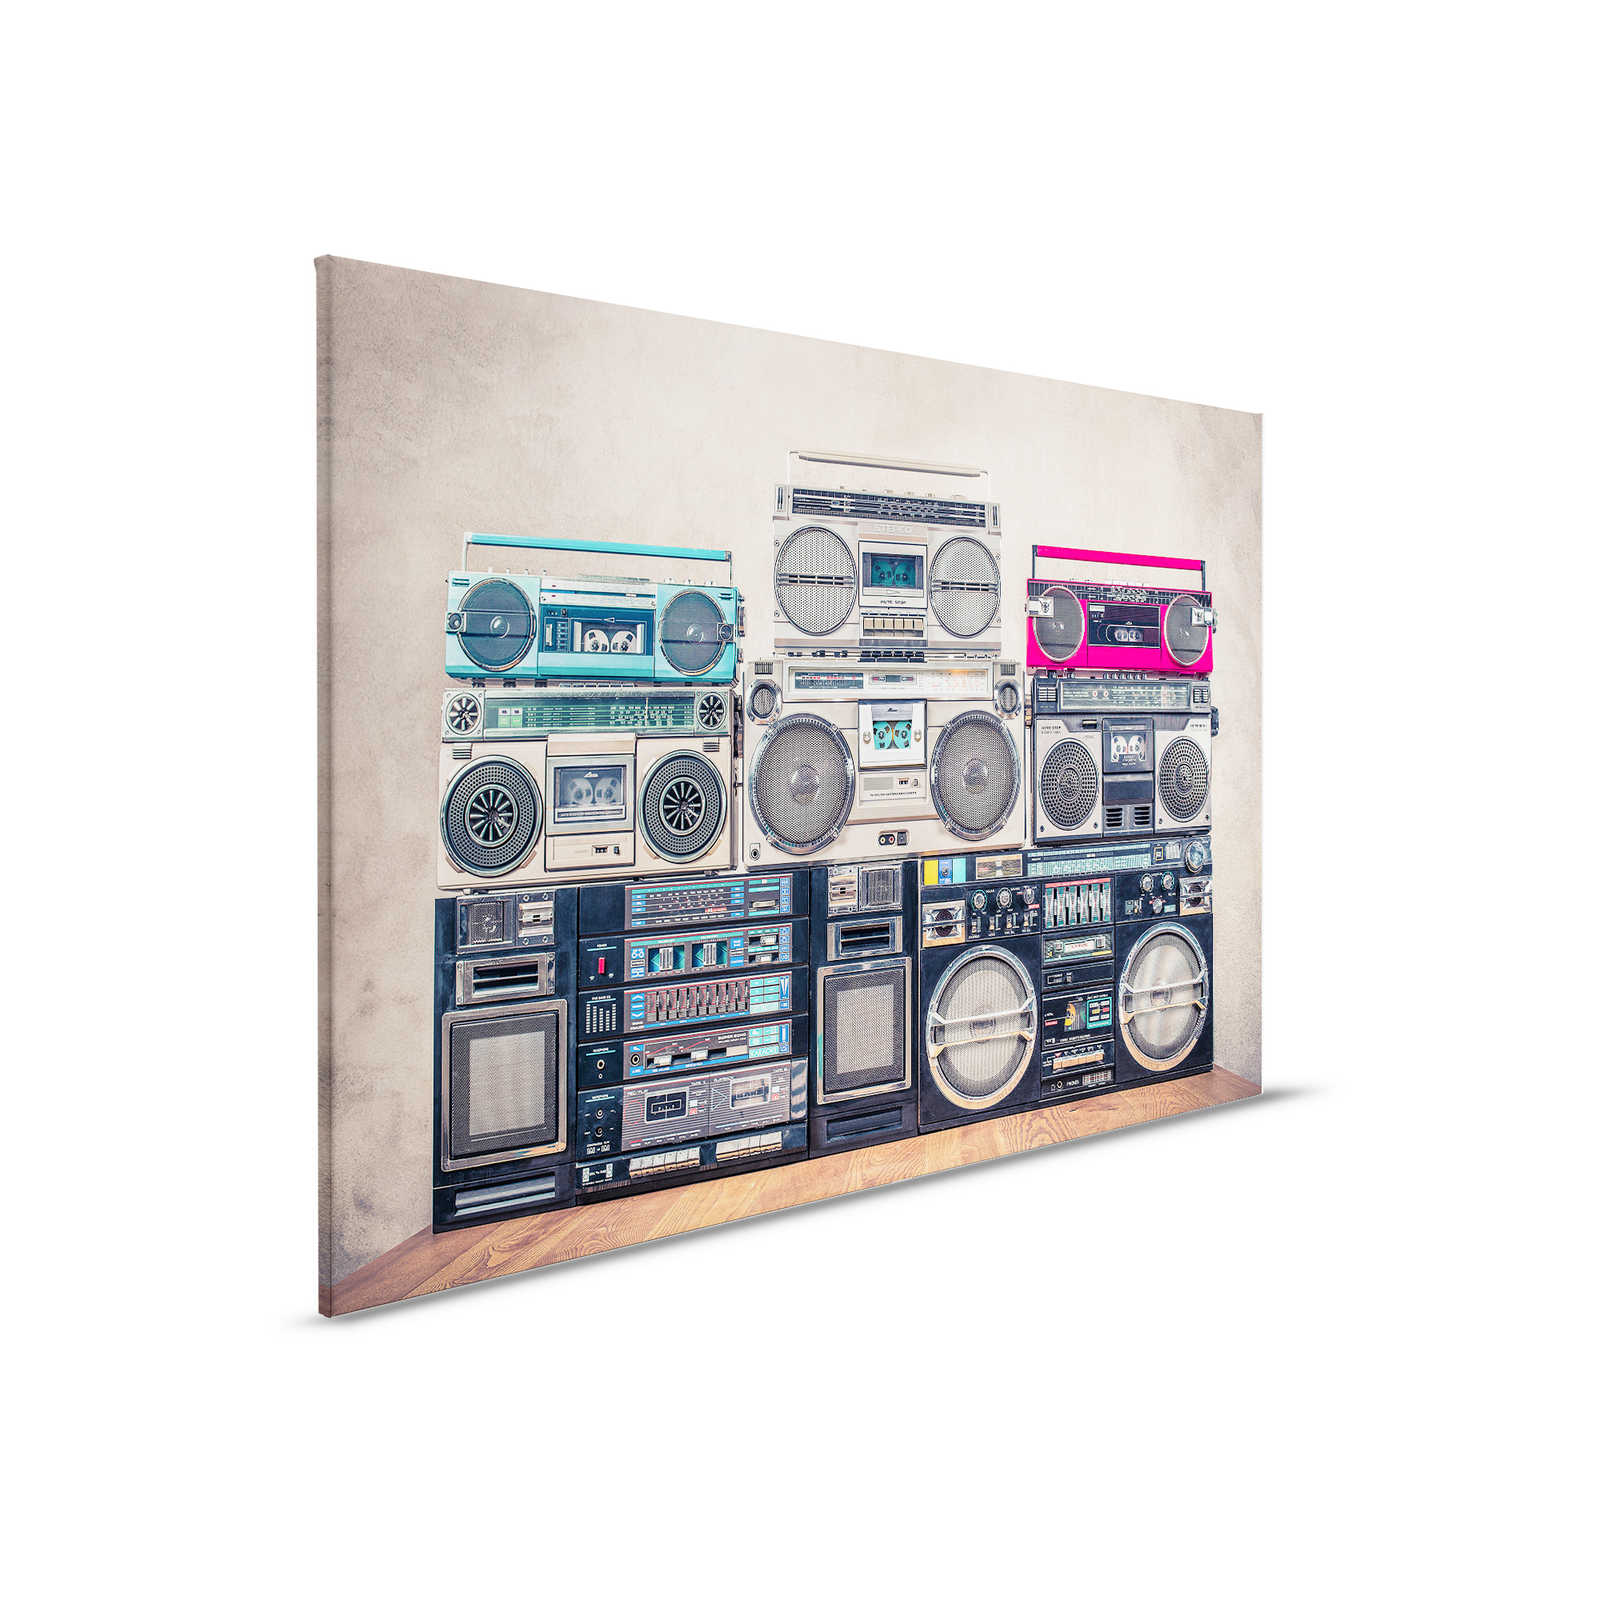         Canvas painting Radios on wooden table in front of wall - 0,90 m x 0,60 m
    